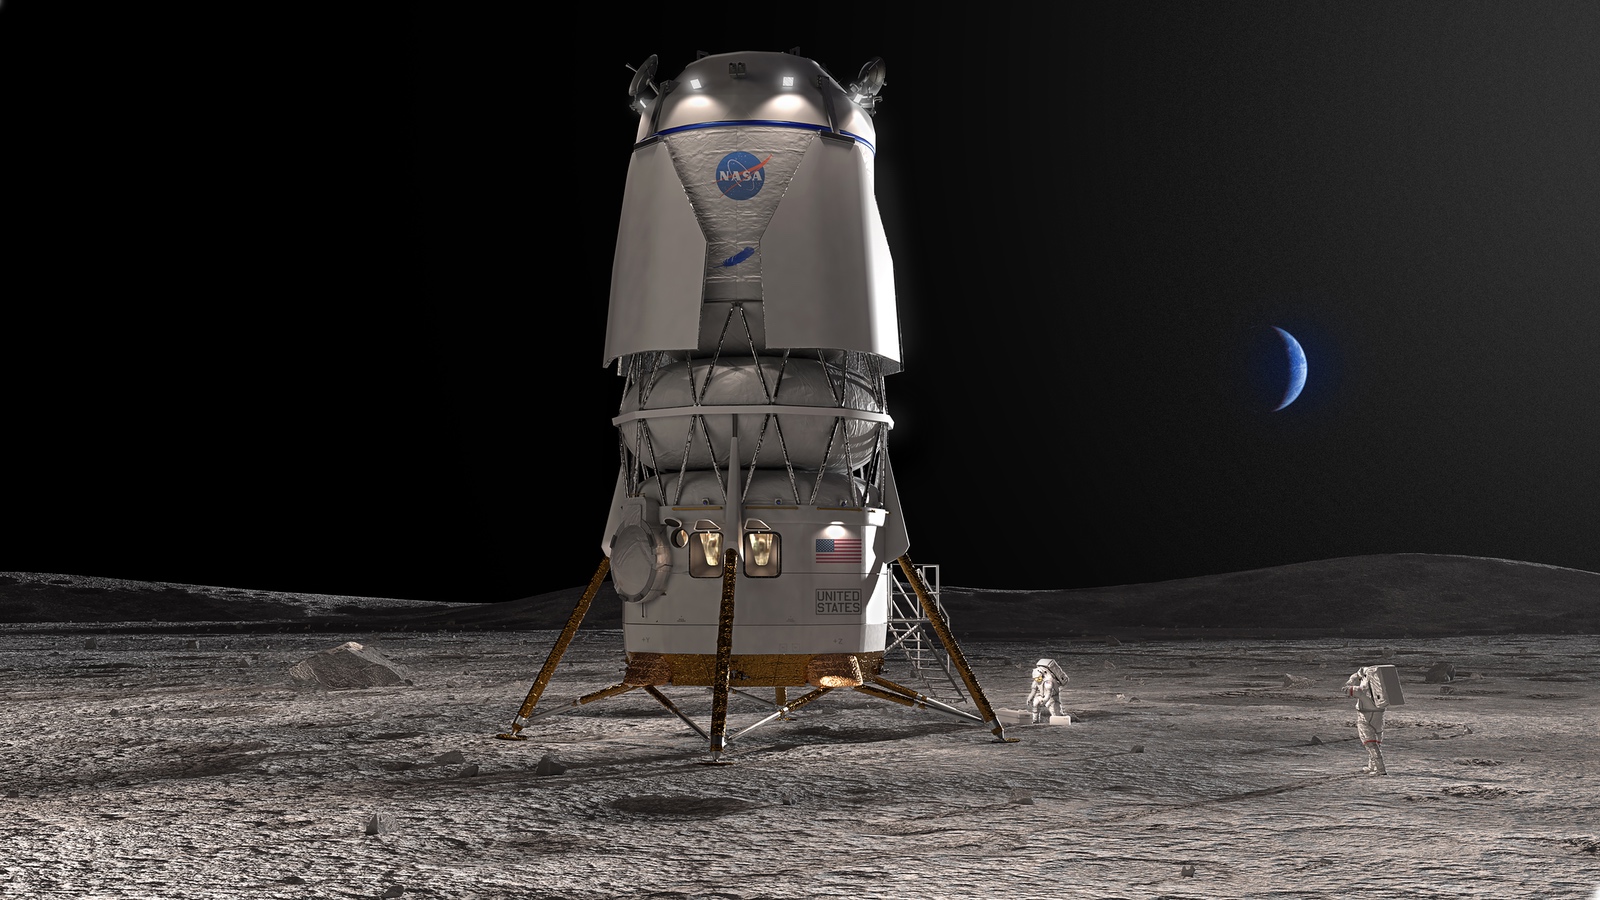 Blue Origin and SpaceX have begun work on cargo versions of manned lunar landers